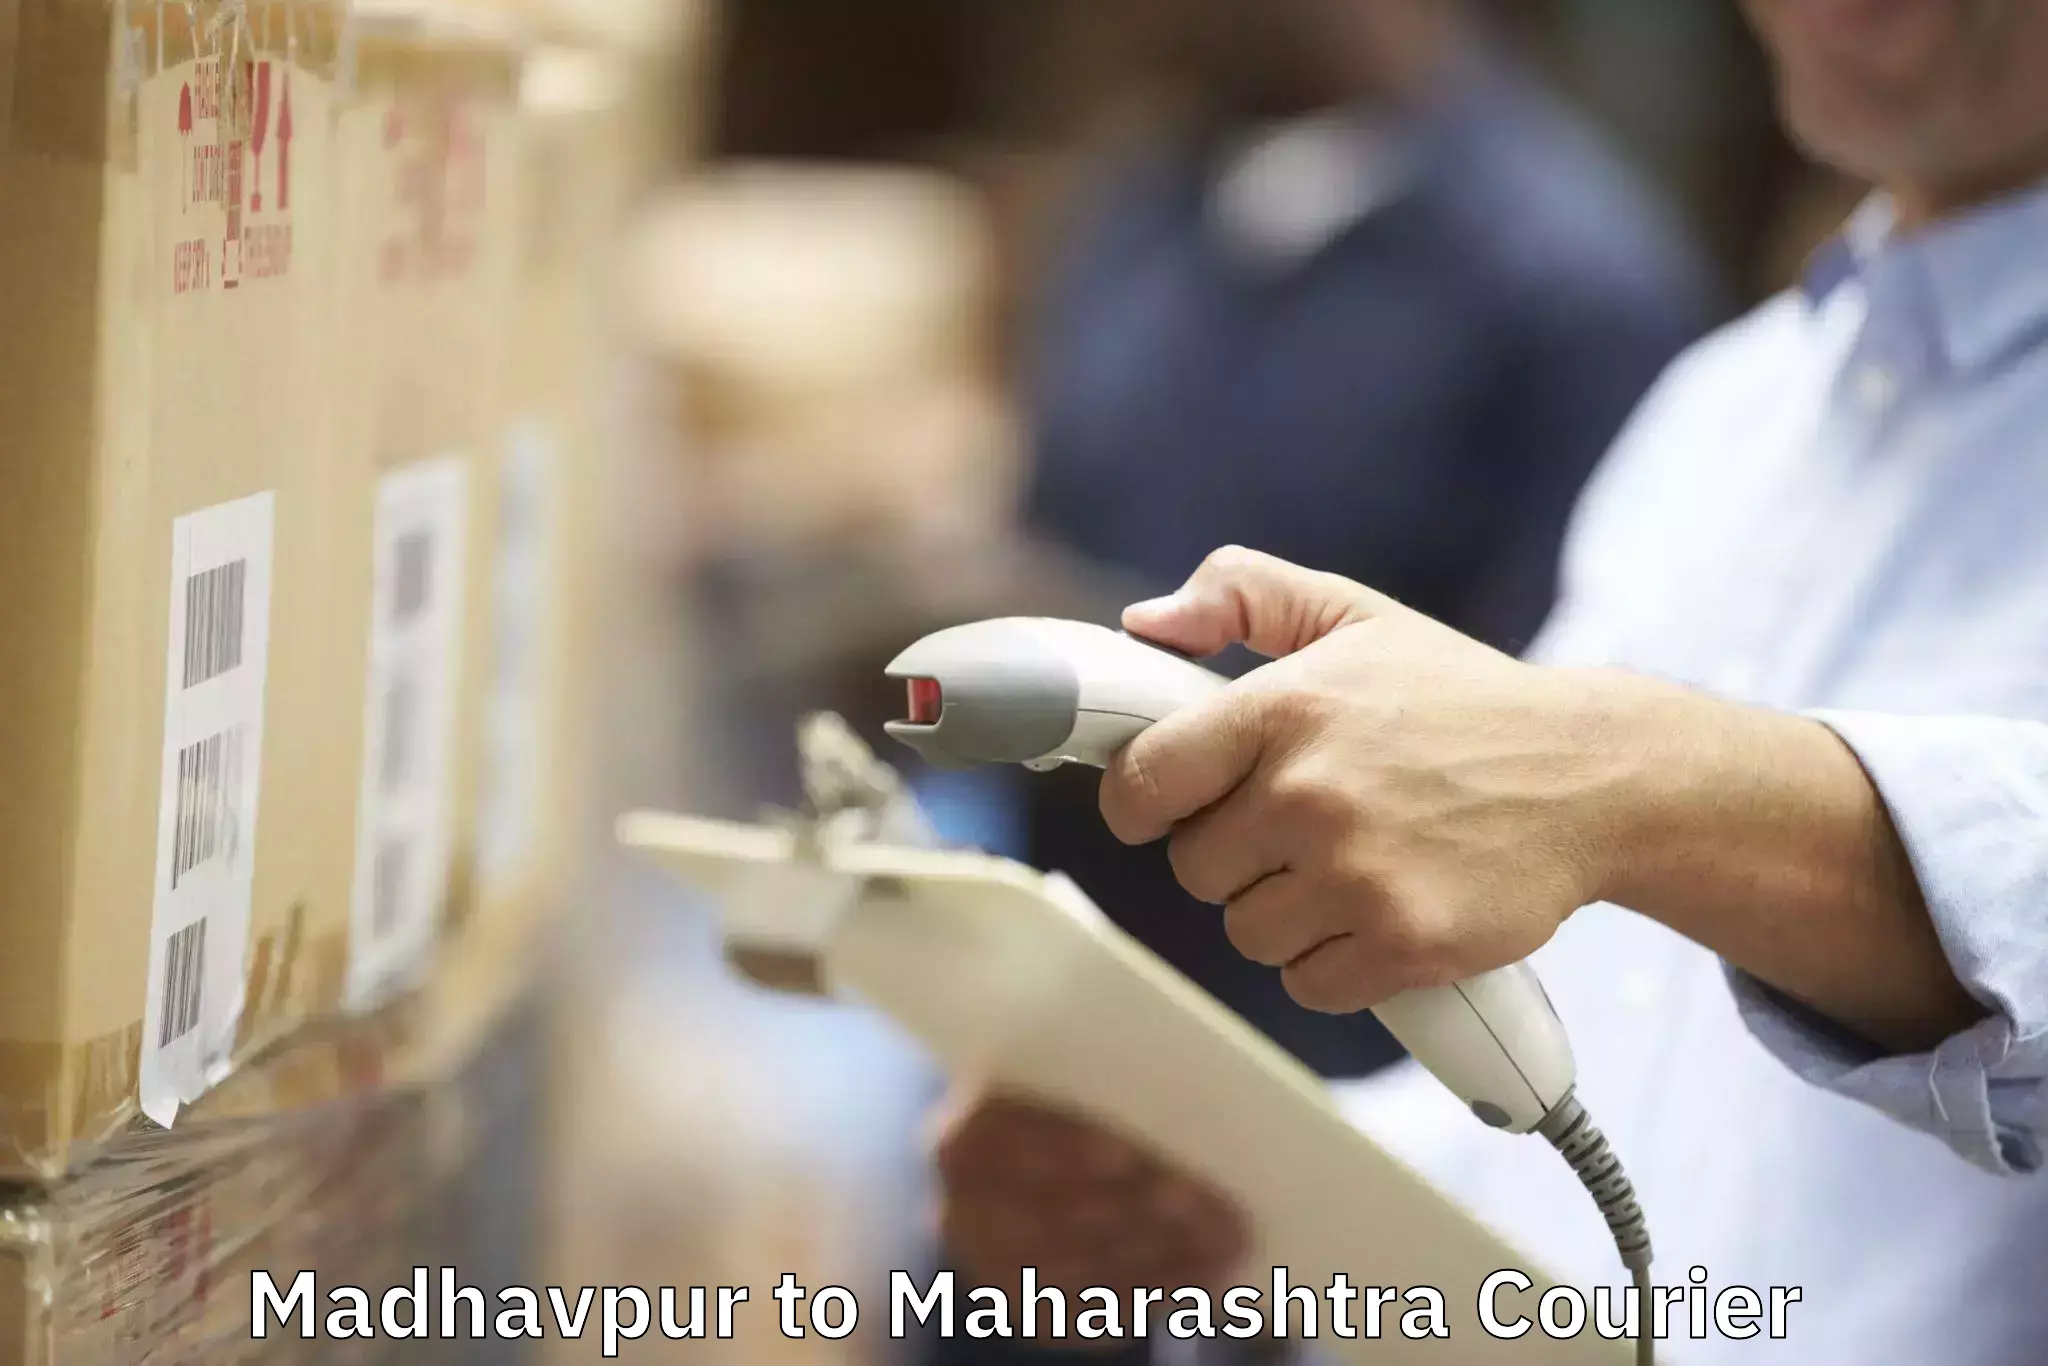 Efficient relocation services in Madhavpur to Shegaon